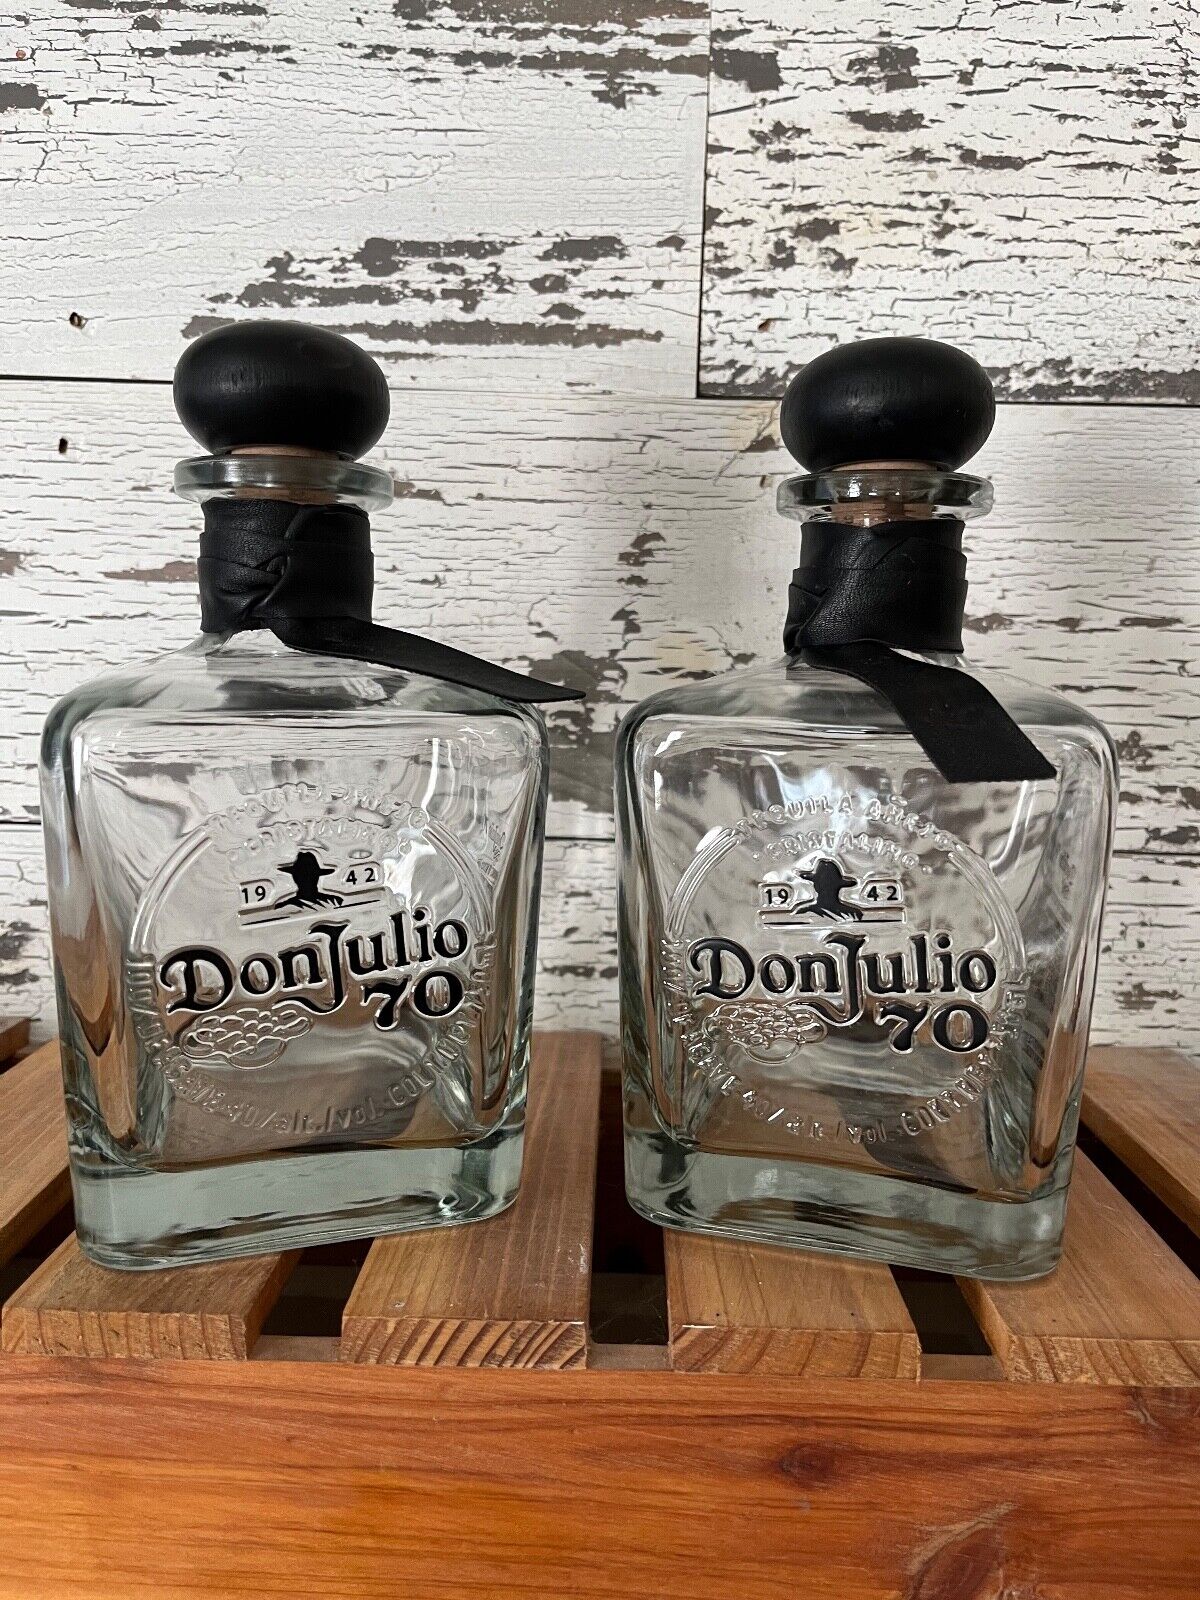 Lot of two (2) 1942 Don Julio 70th Anniversary Edition Bottles (Empty of liquor)